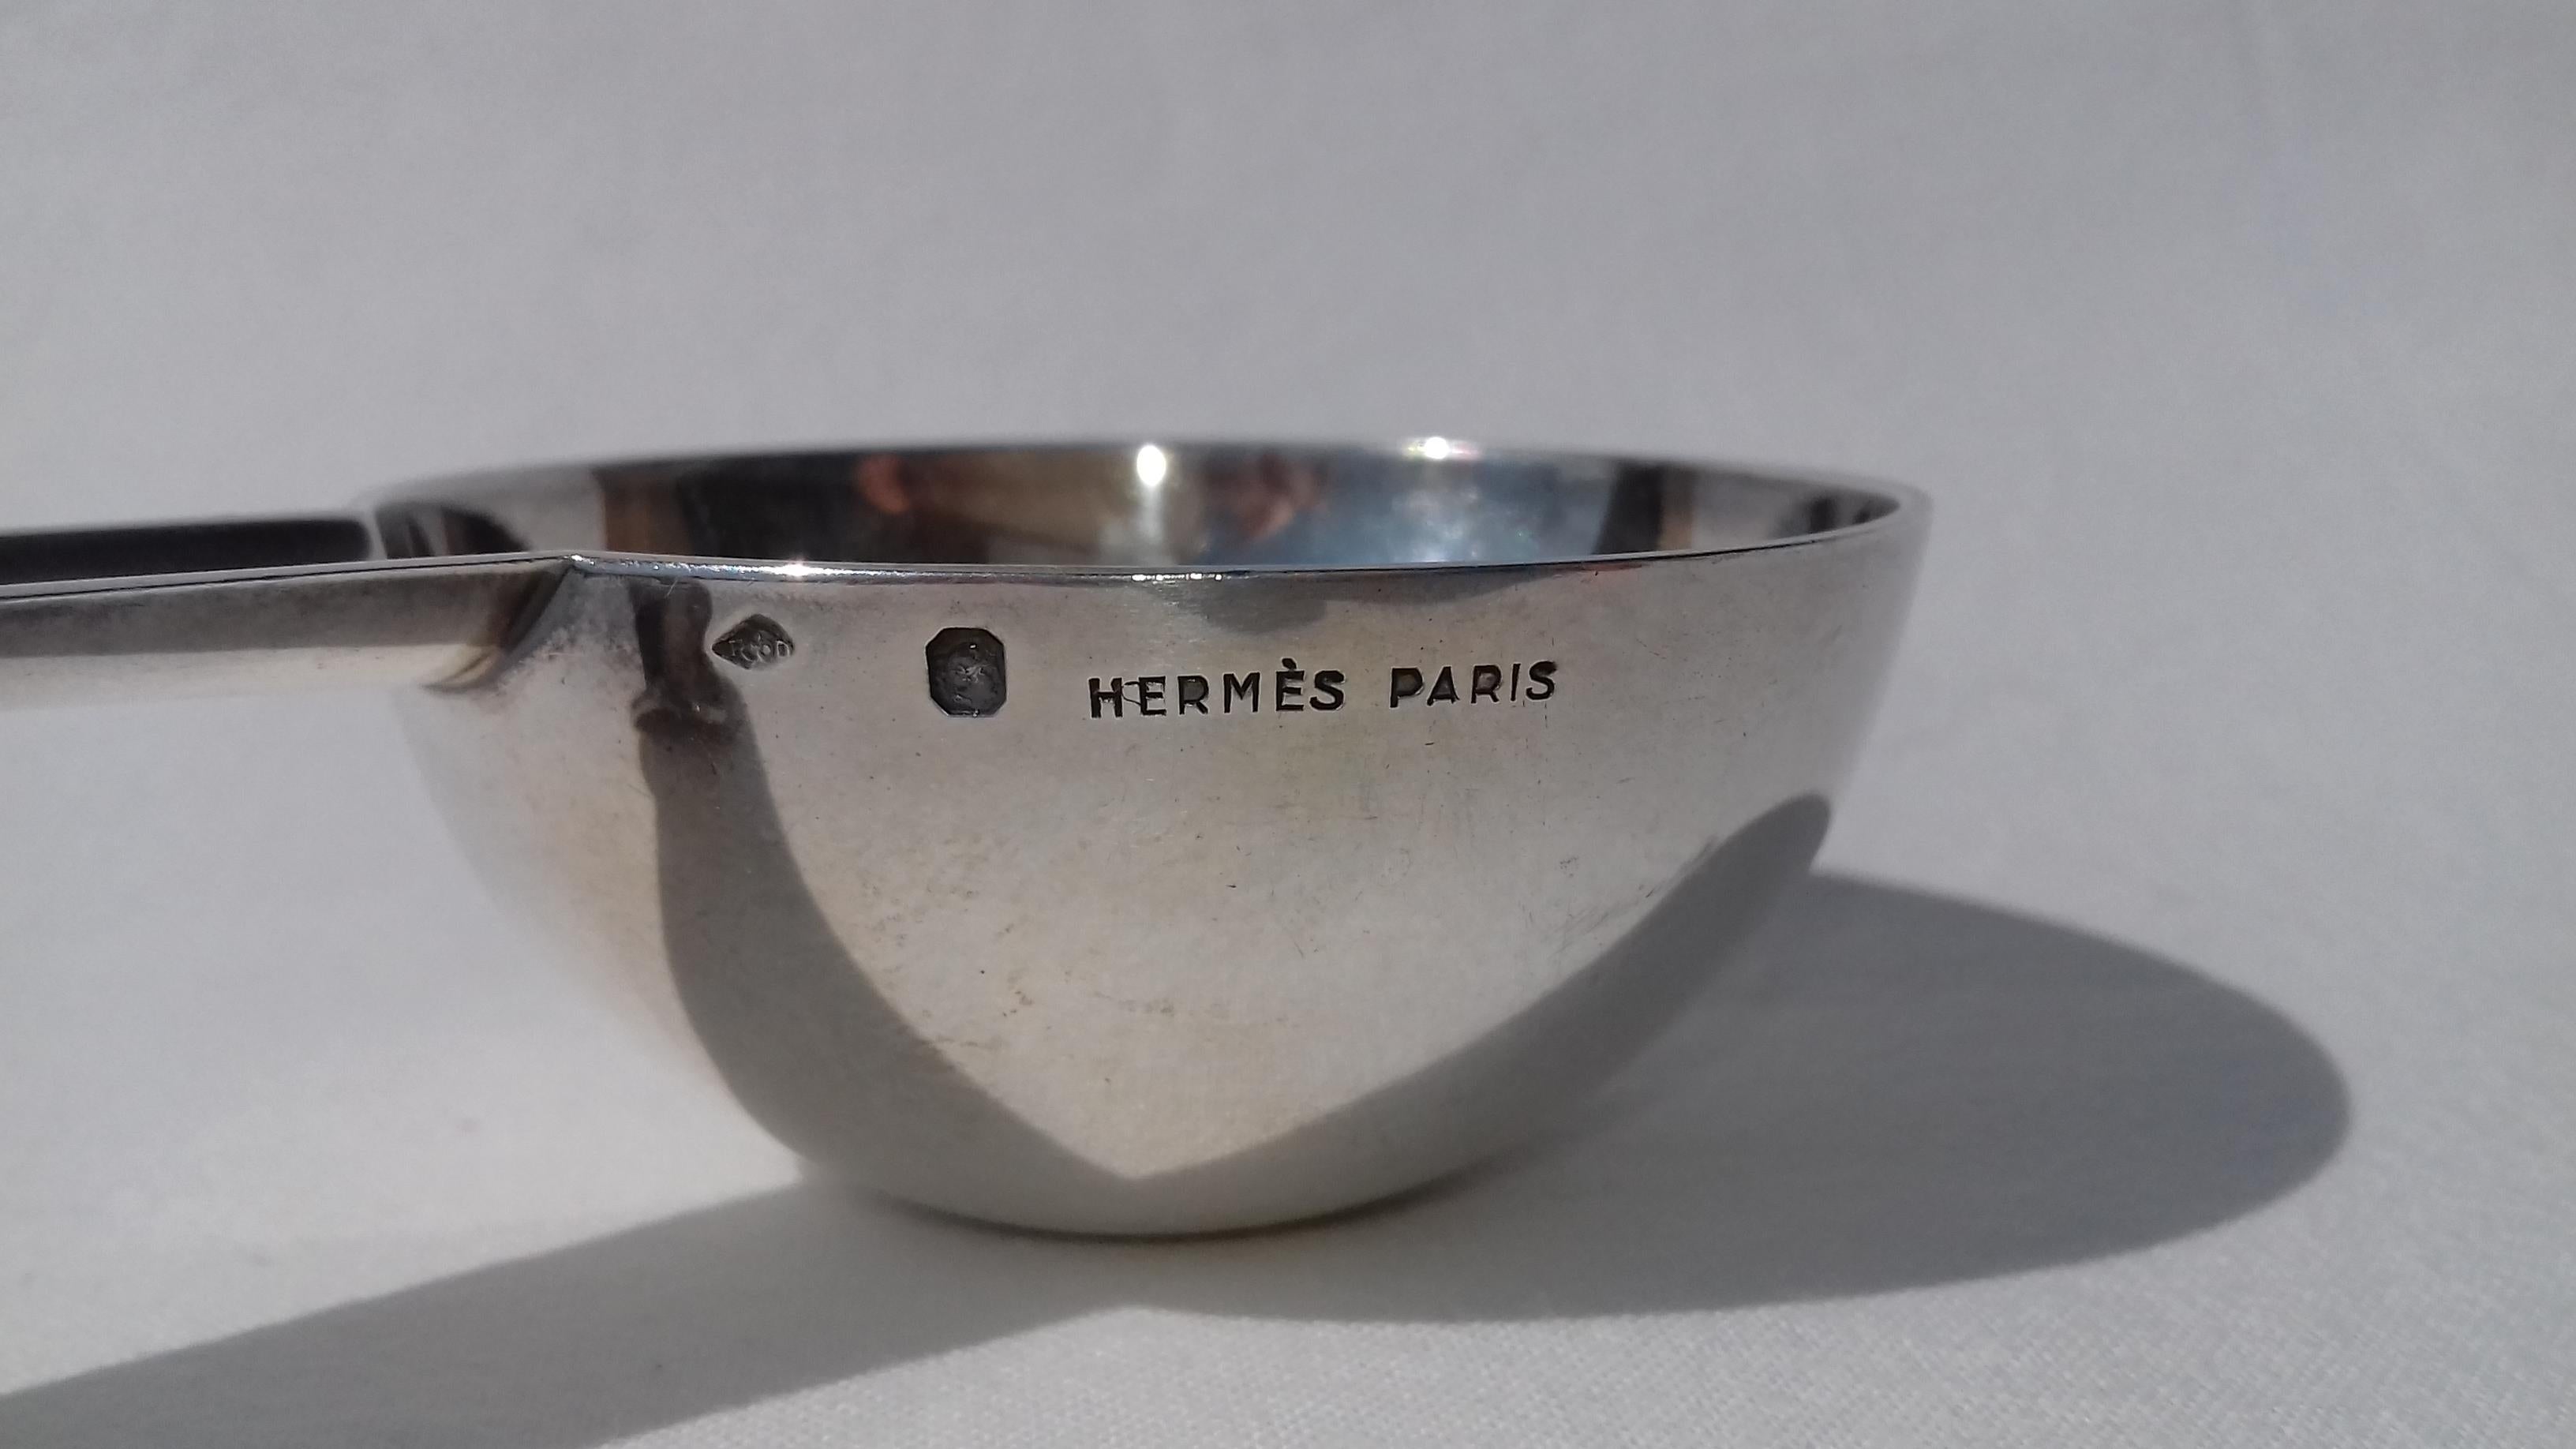 Rare Authentic Hermès Wine Taster

By Ravinet d'Enfert

Its first use is probably to taste the wine (tastevin in french), and the small hole at the end of the handle to wear it as a necklace during a wine tasting

Can be used for quite another